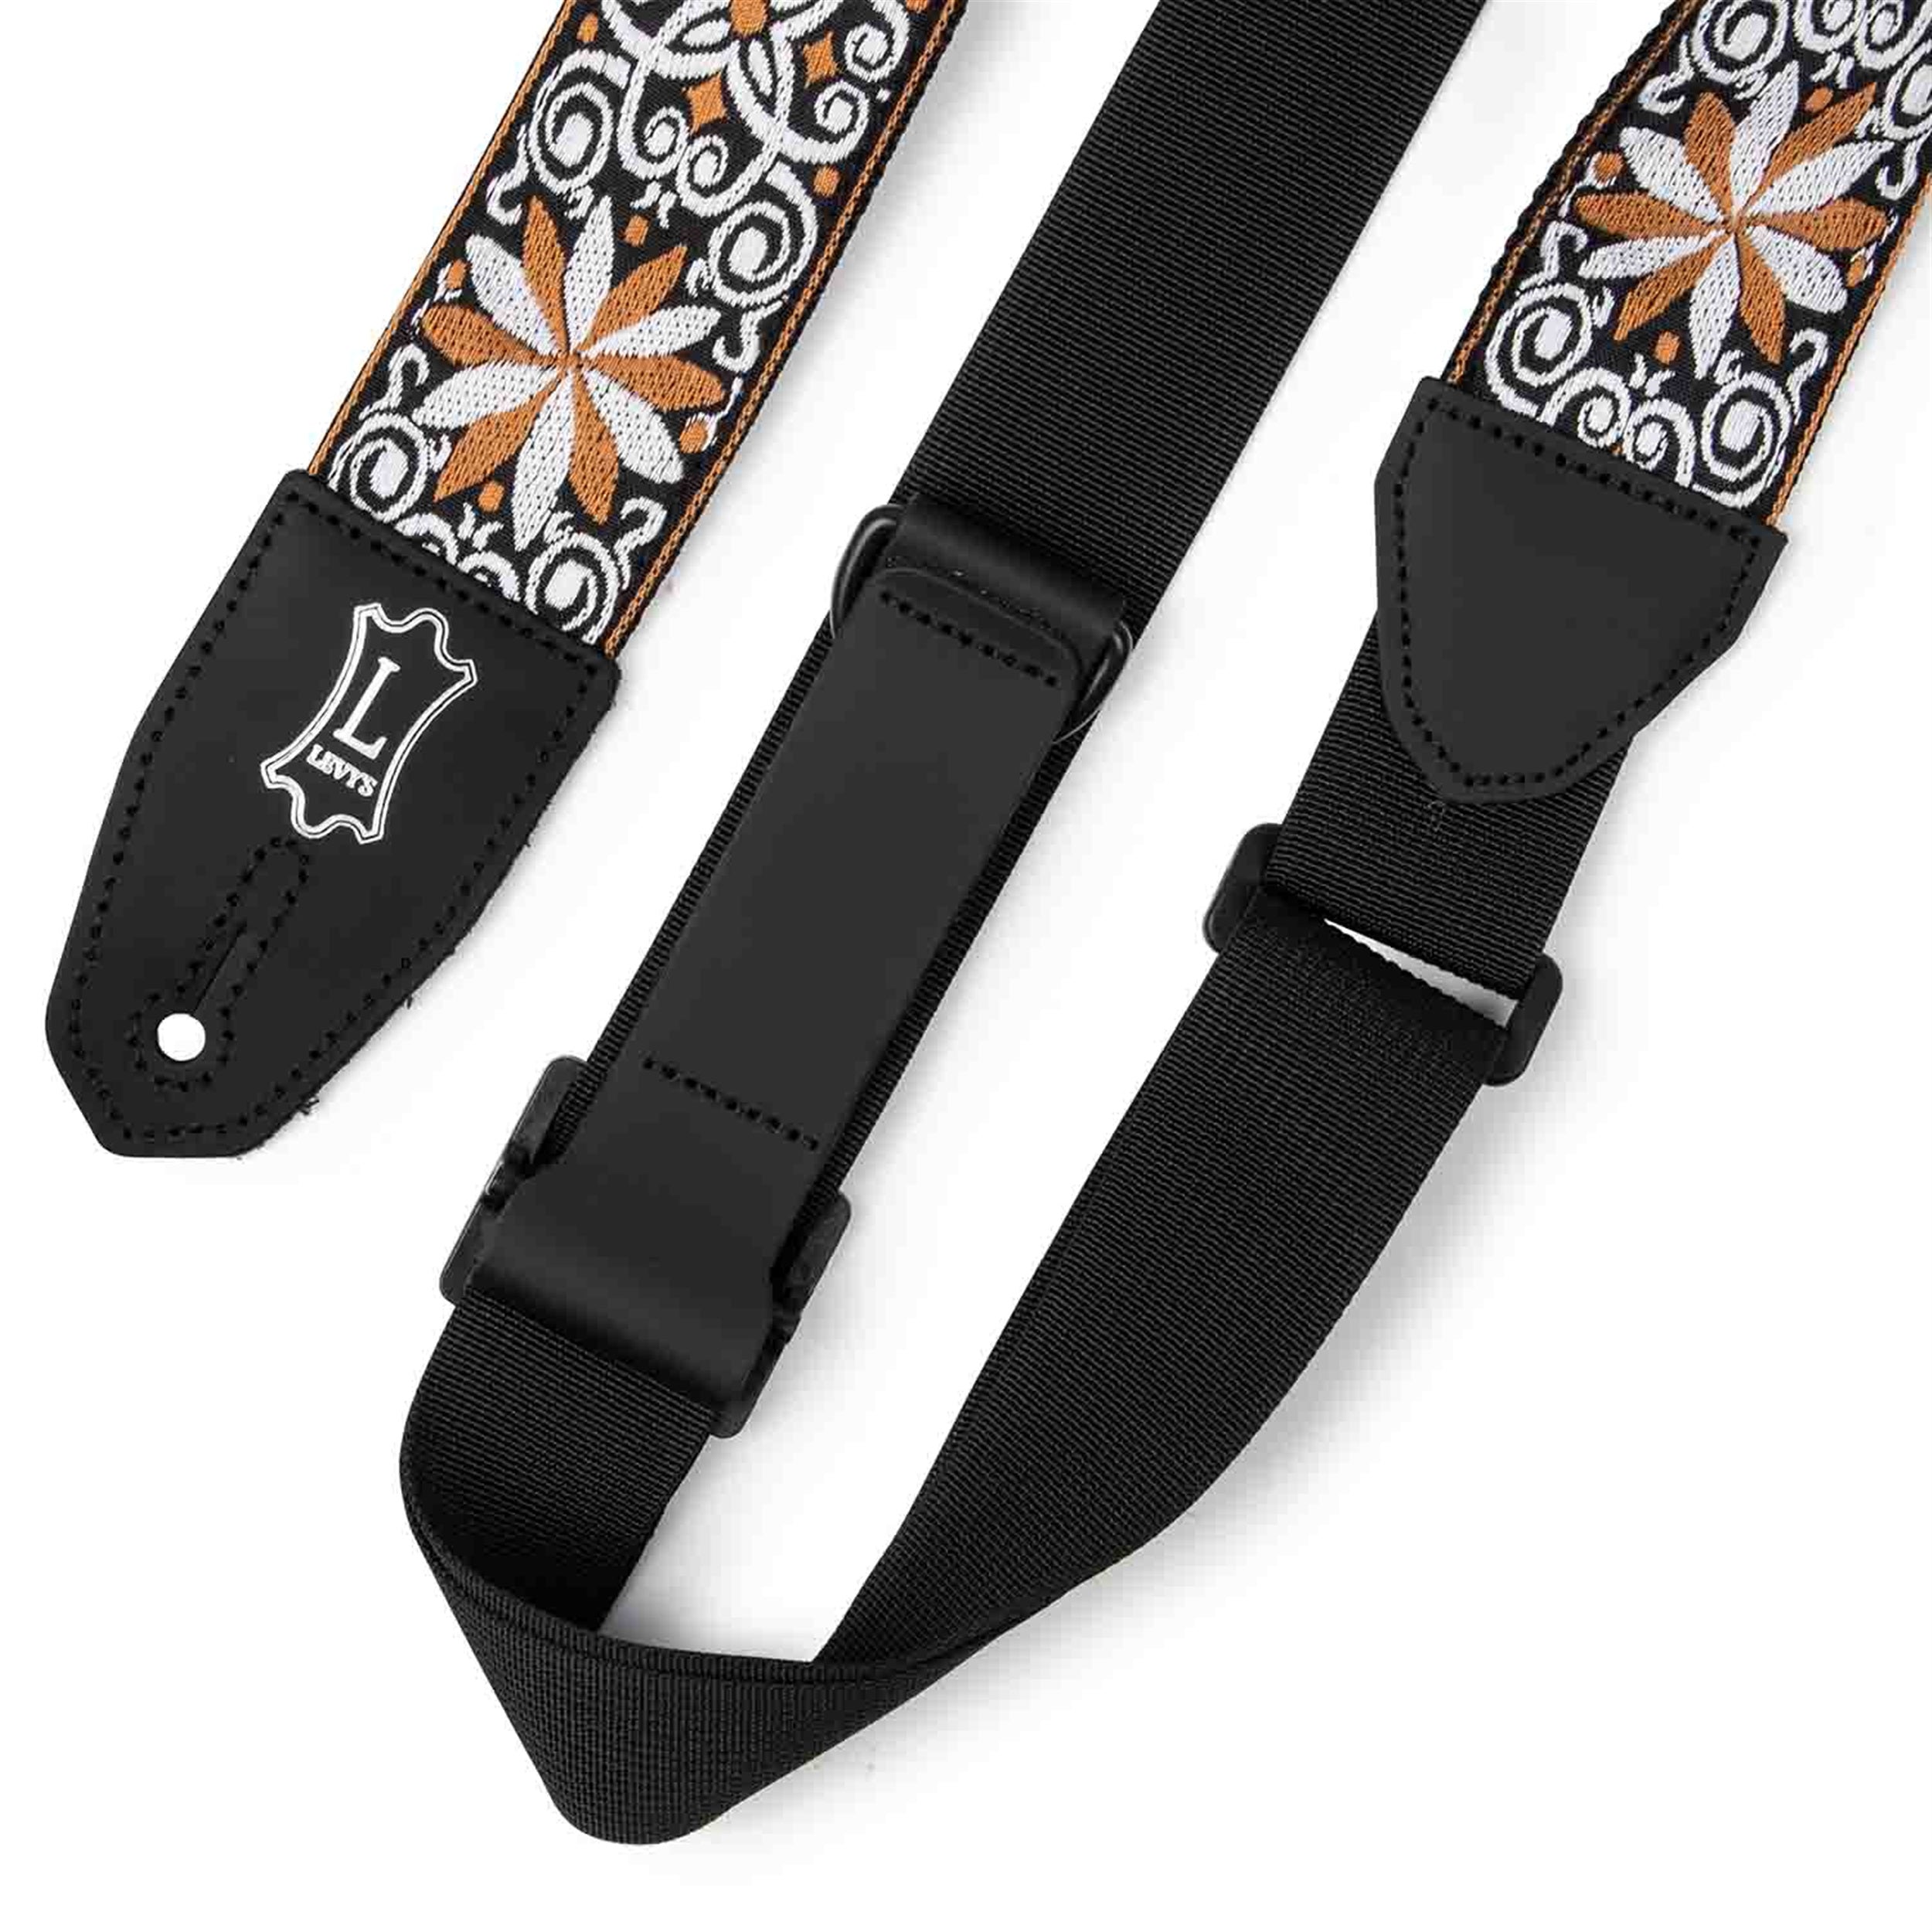 Levy's Leathers MRHHT-13 Floral Right Height Guitar Strap - Yellow and White - Hollywood DJ